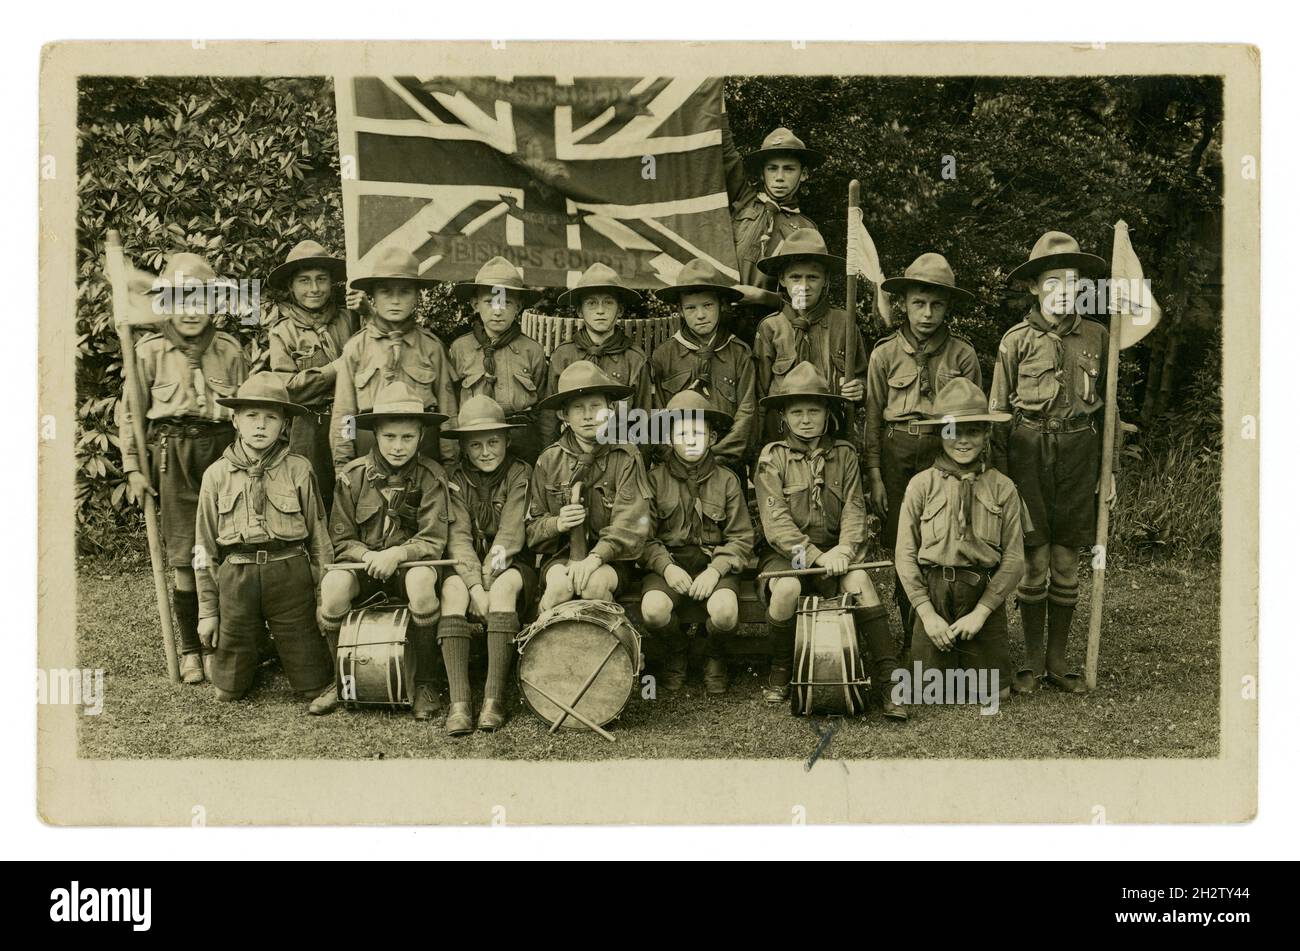 Original early 1900's postcard of 1st Freshfield Bishop’s Court Scout Troop band (founded in 1915), with Union Jack flag with Freshfield, Bishop Court and the Scout motif embroidered  on it. The boys at the front are holding their drums, wearing hats and some are holding flags. Bishop's Court School, Freshfield, Formby, Liverpool, Lancashire, U.K.  circa 1918, 1919 or early 1920's Stock Photo